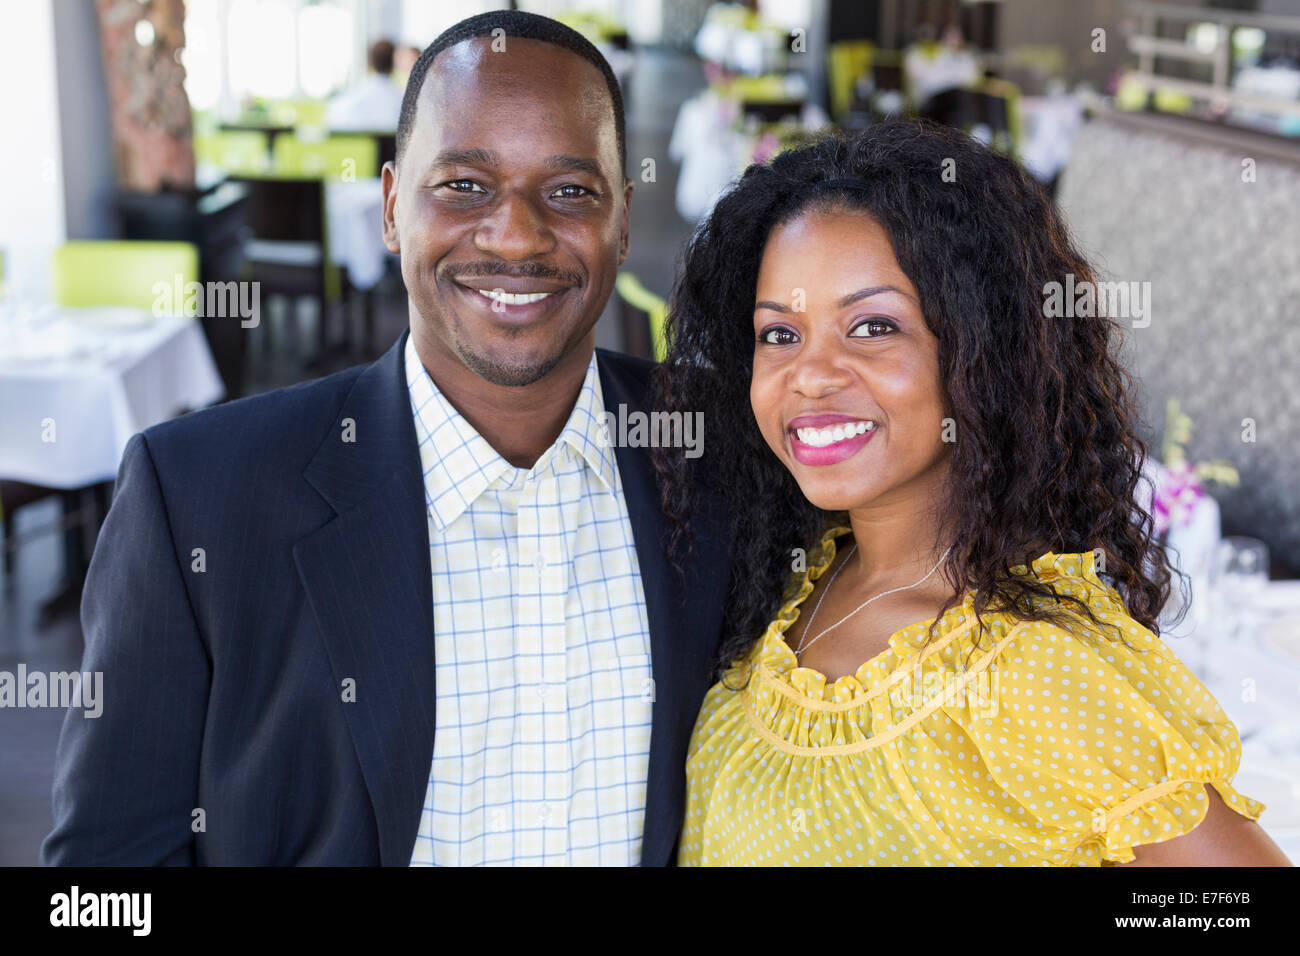 African American couple smiling in restaurant Stock Photo